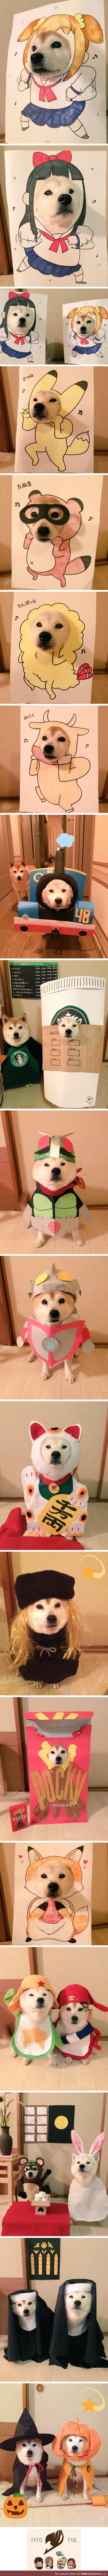 Hooman creates outfits for doge and the result is hilarious